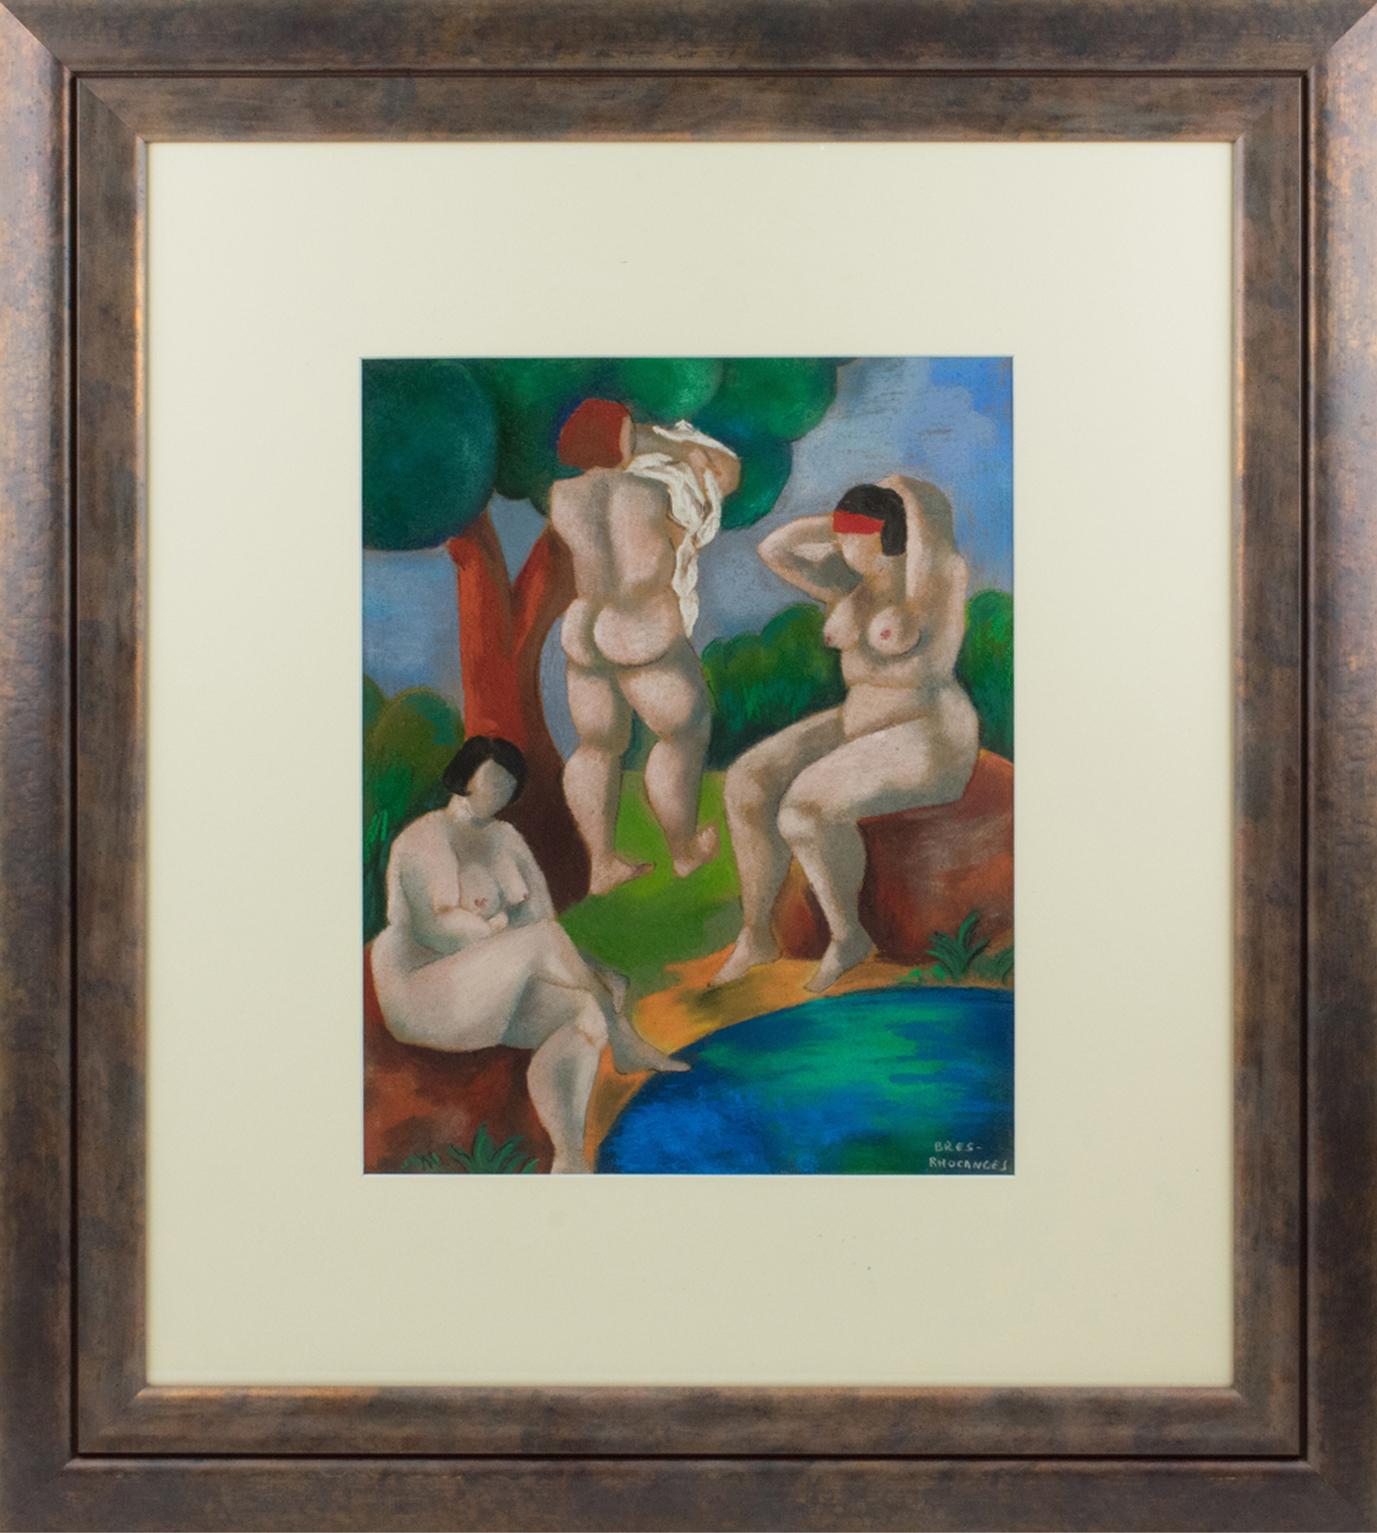 This pastel painting by Catherine Bres-Rhocanges (1947 -) is titled "Group of Bathers" and signed on the bottom right corner "Bres-Rhocanges."
Catherine Bres-Rhocanges paints women with generous forms and fine ties. Of cubist influence, the bodies